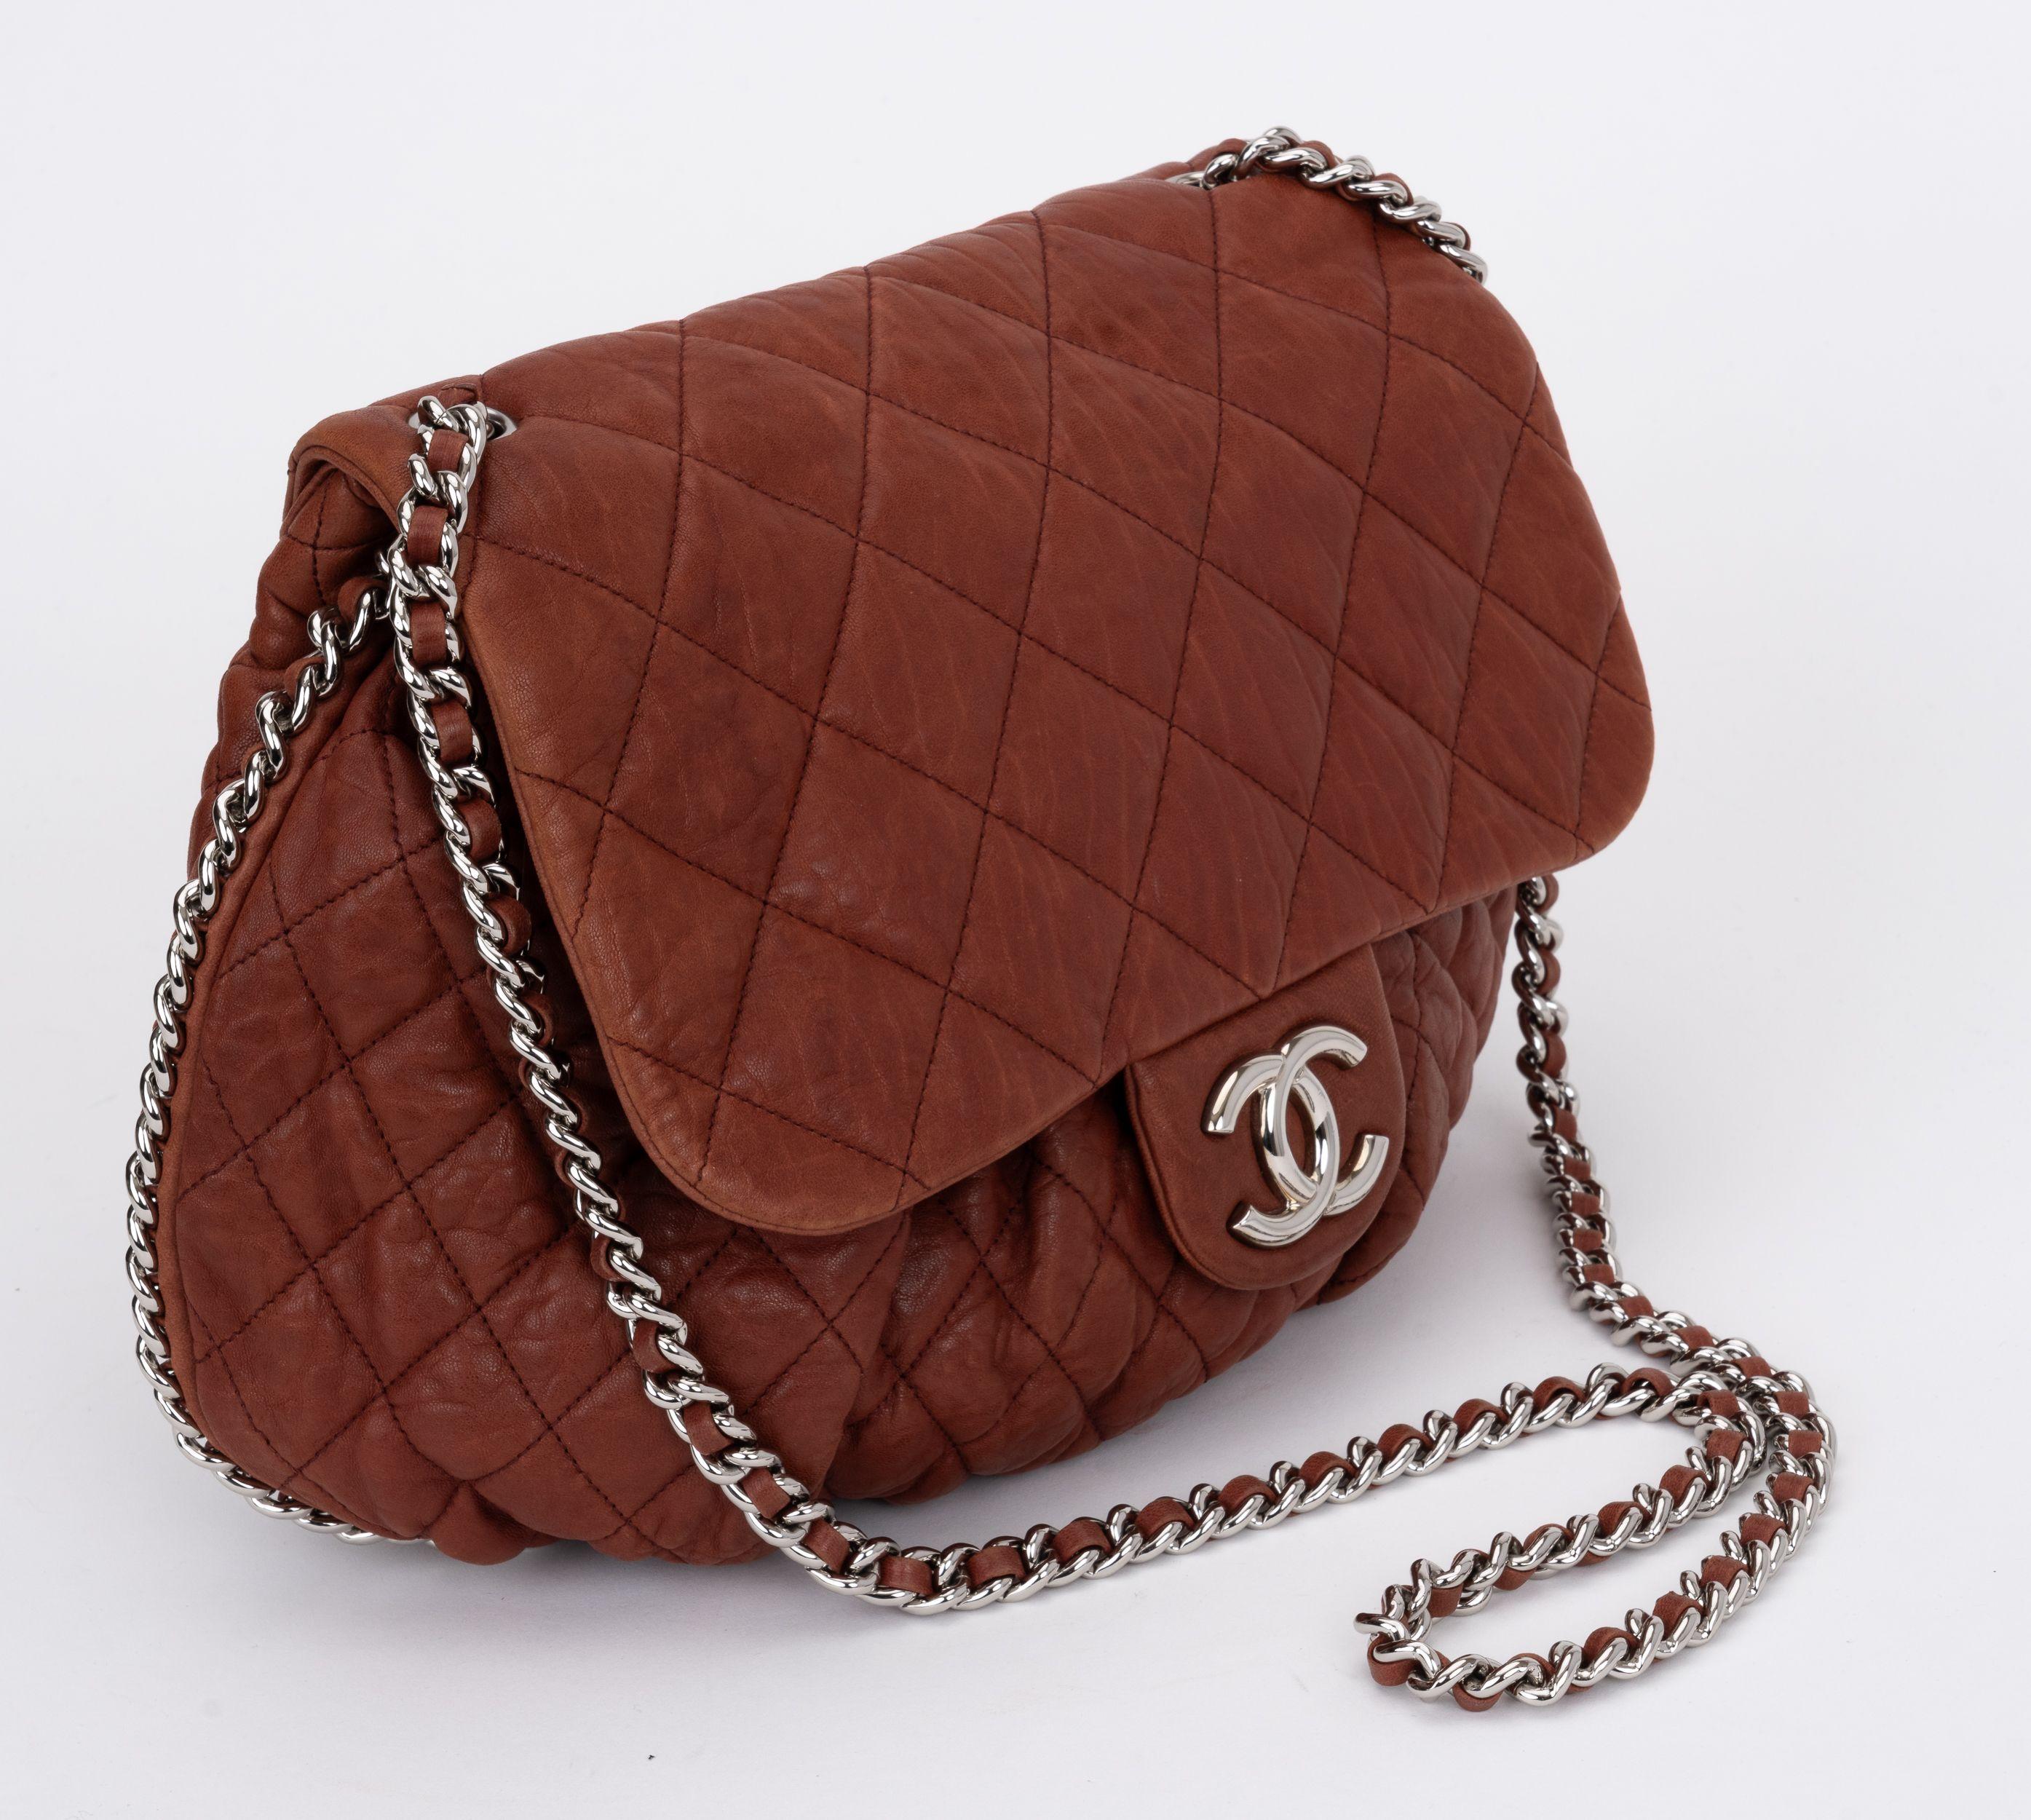 Chanel chain around medium shoulder/cross body bag. Medium brown quilted leather and silver tone chain. Shoulder drop 23